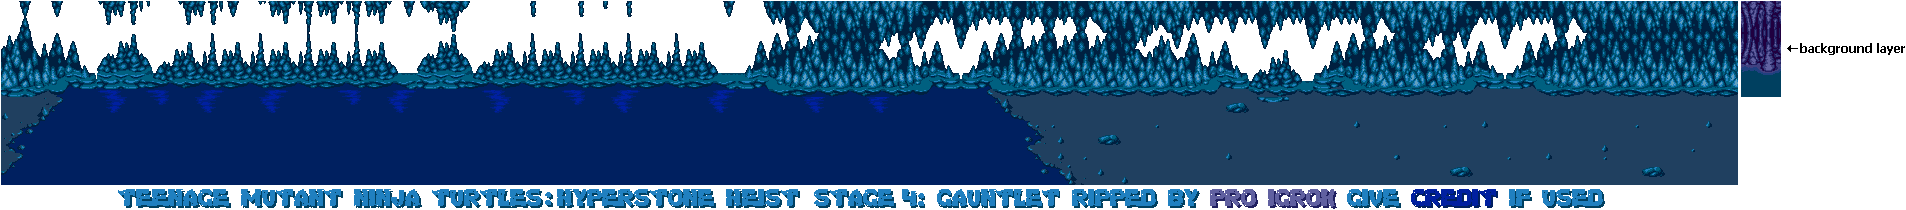 Stage 4: The Gauntlet